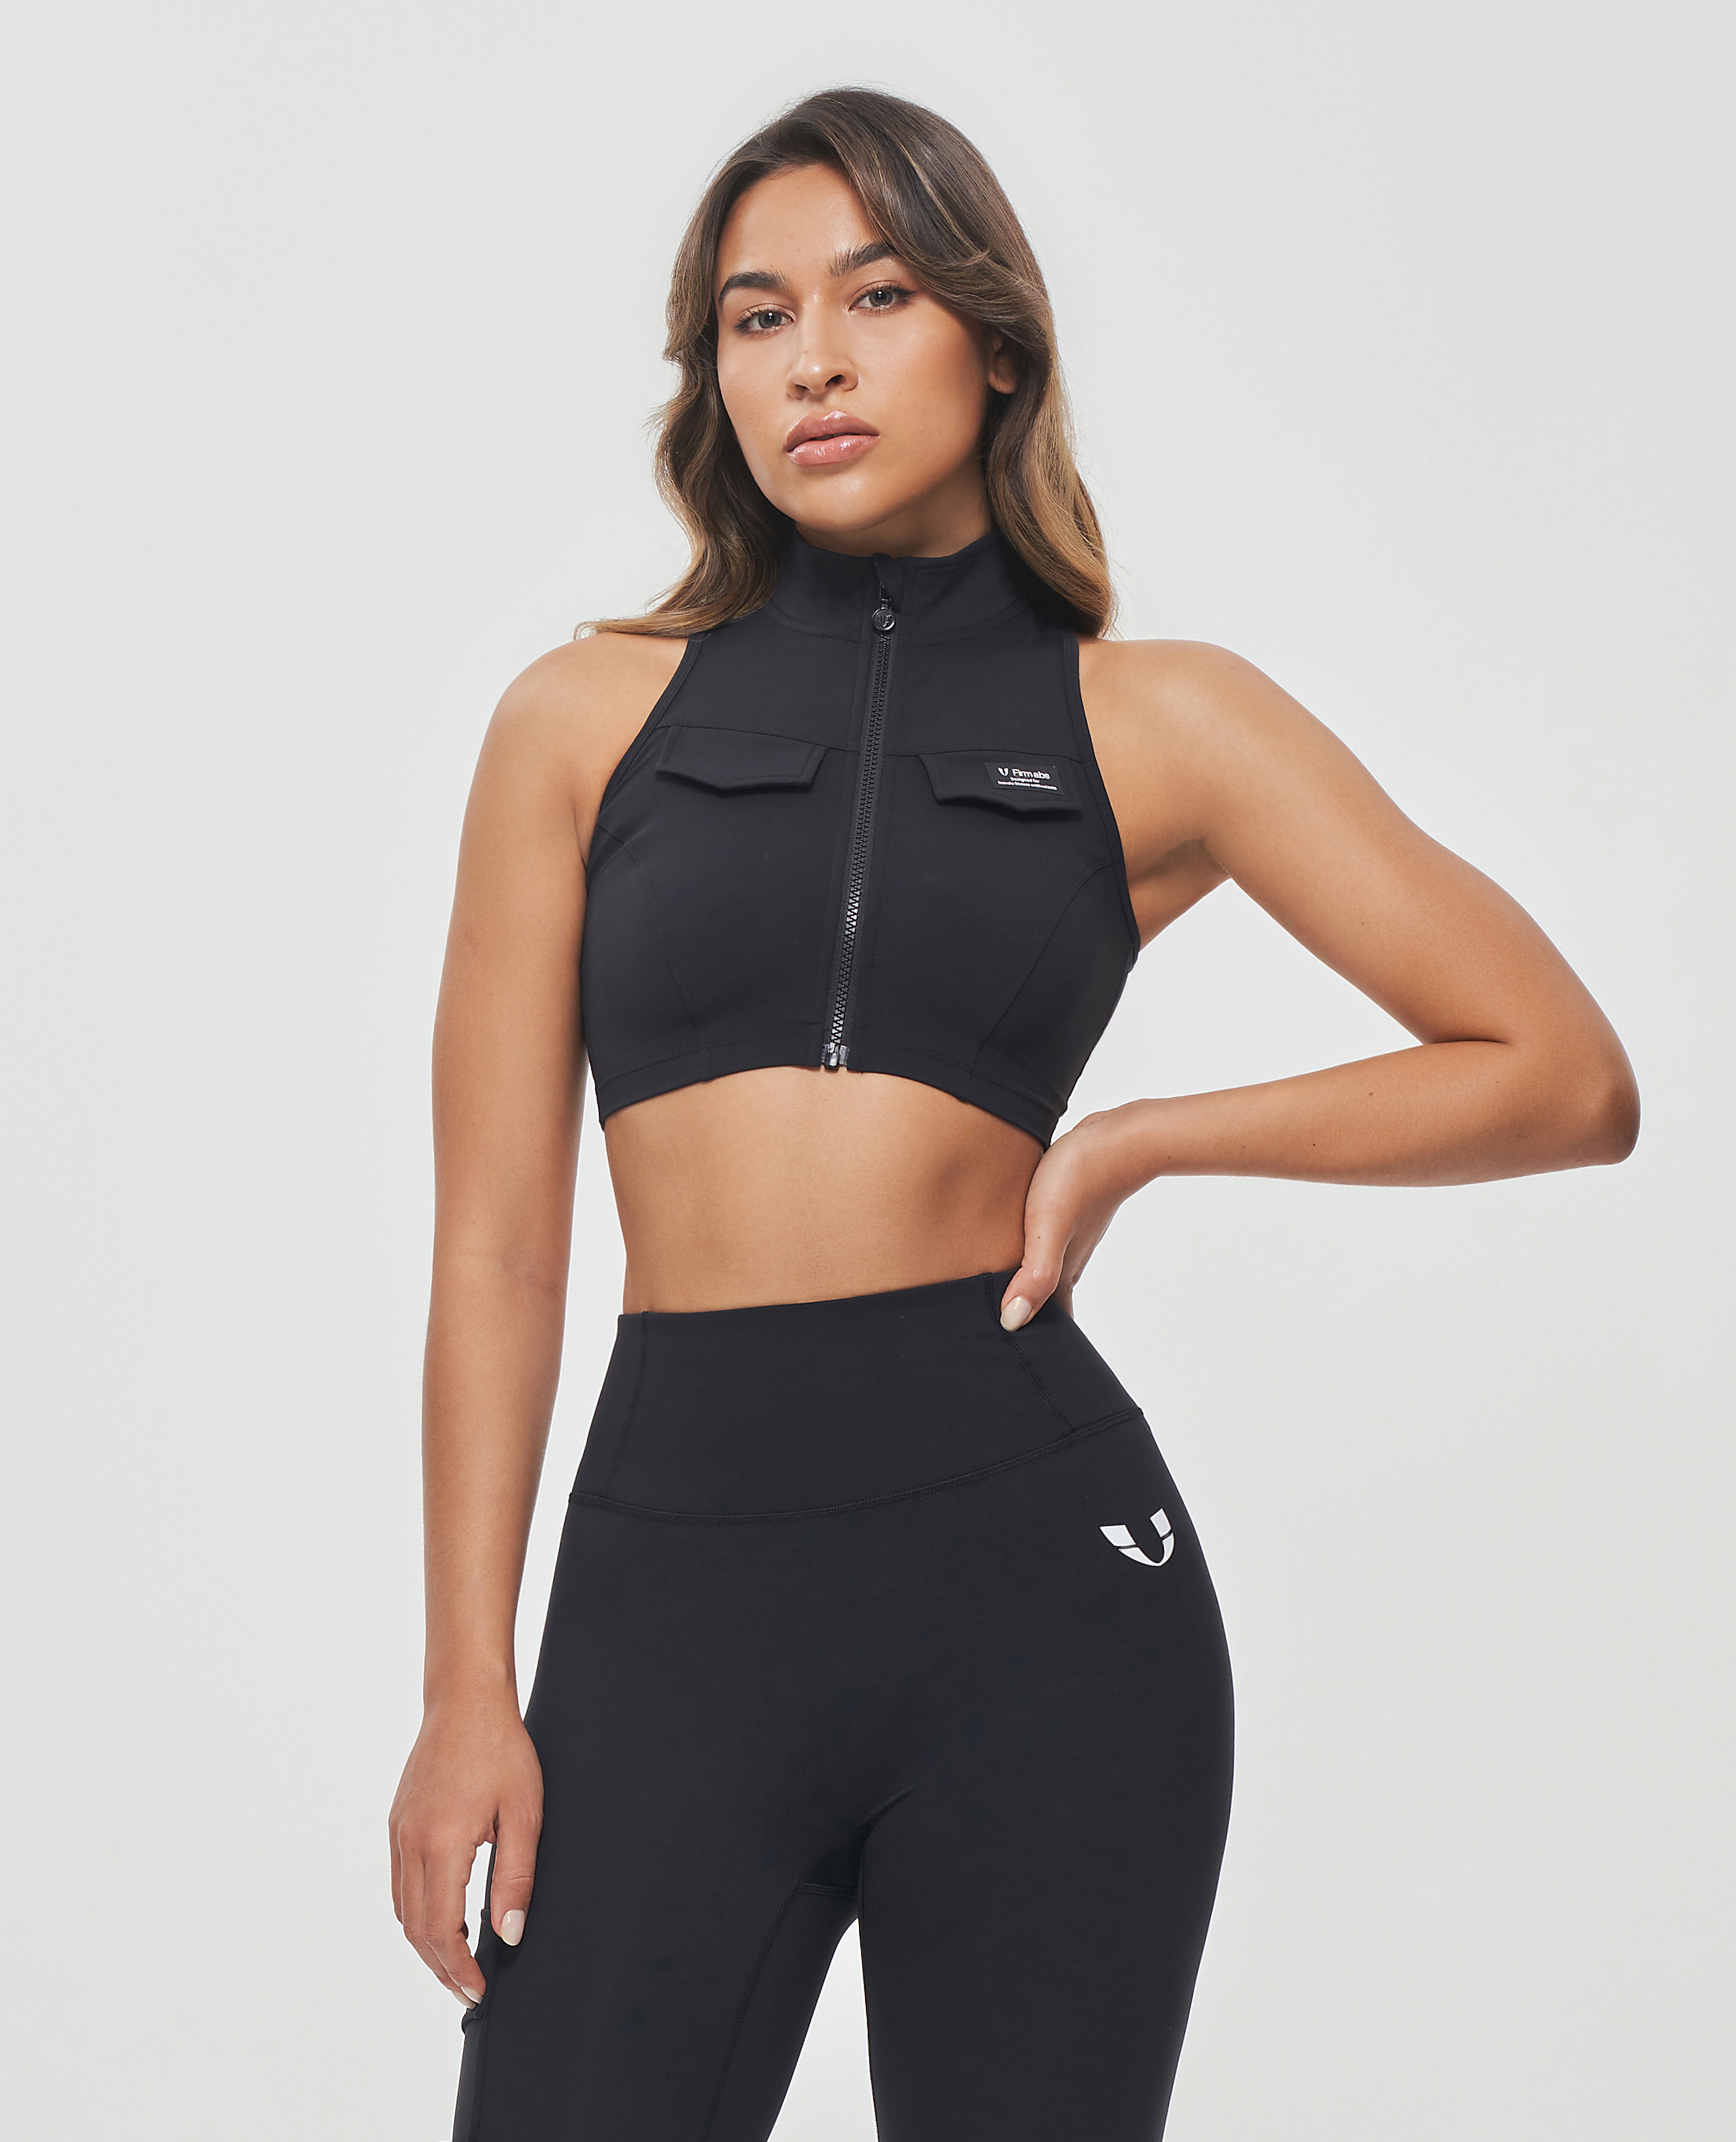 FIRM ABS - We're loving this unique all-black gym wear set! SCOOP NECK  SPORTS BRA:  CARGO V WAIST 7/8 LEGGINGS:   - - thx @therealalilee #FIRMABSwomen  #workoutwithFIRMABS - - - - #